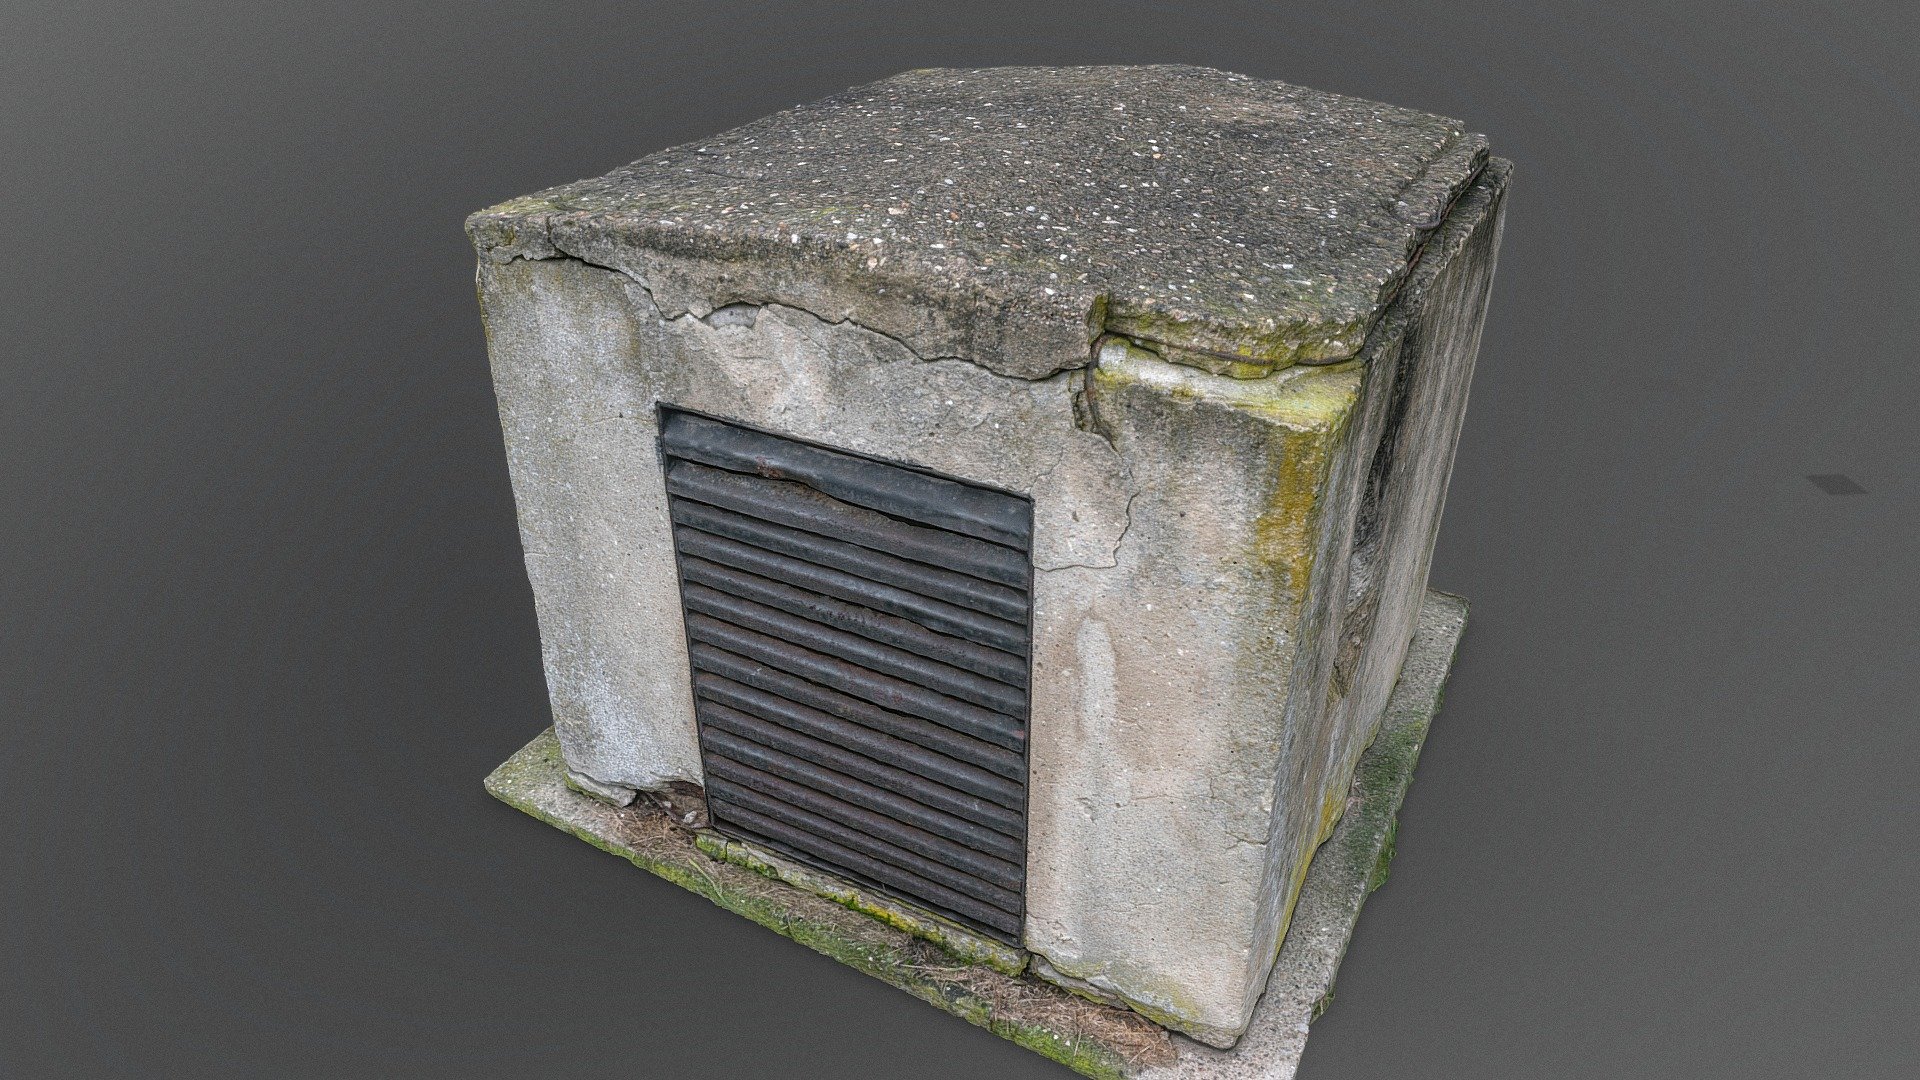 Steam exhaust concrete housing, vintage old east europe city pipeline network

photogrammetry scan 2x16K texture + HD normals

Created in RealityCapture by Capturing Reality - Steam exhaust - Download Free 3D model by axonite 3d model